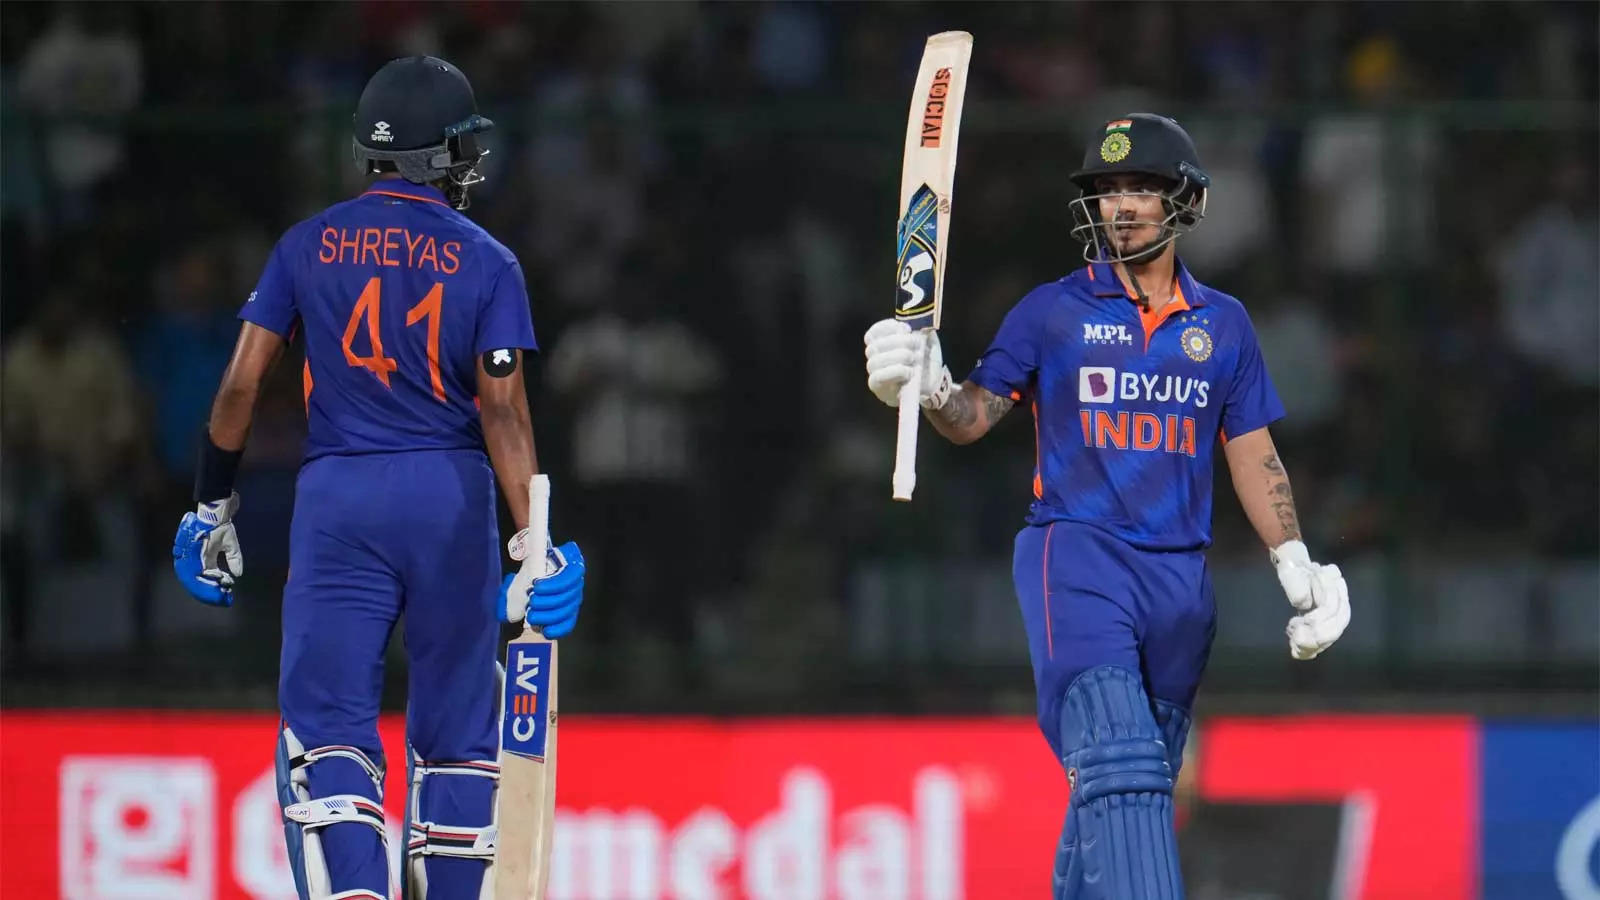 Ishan Kishan and Shreyas Iyer weren't picked for Asia Cup 2022